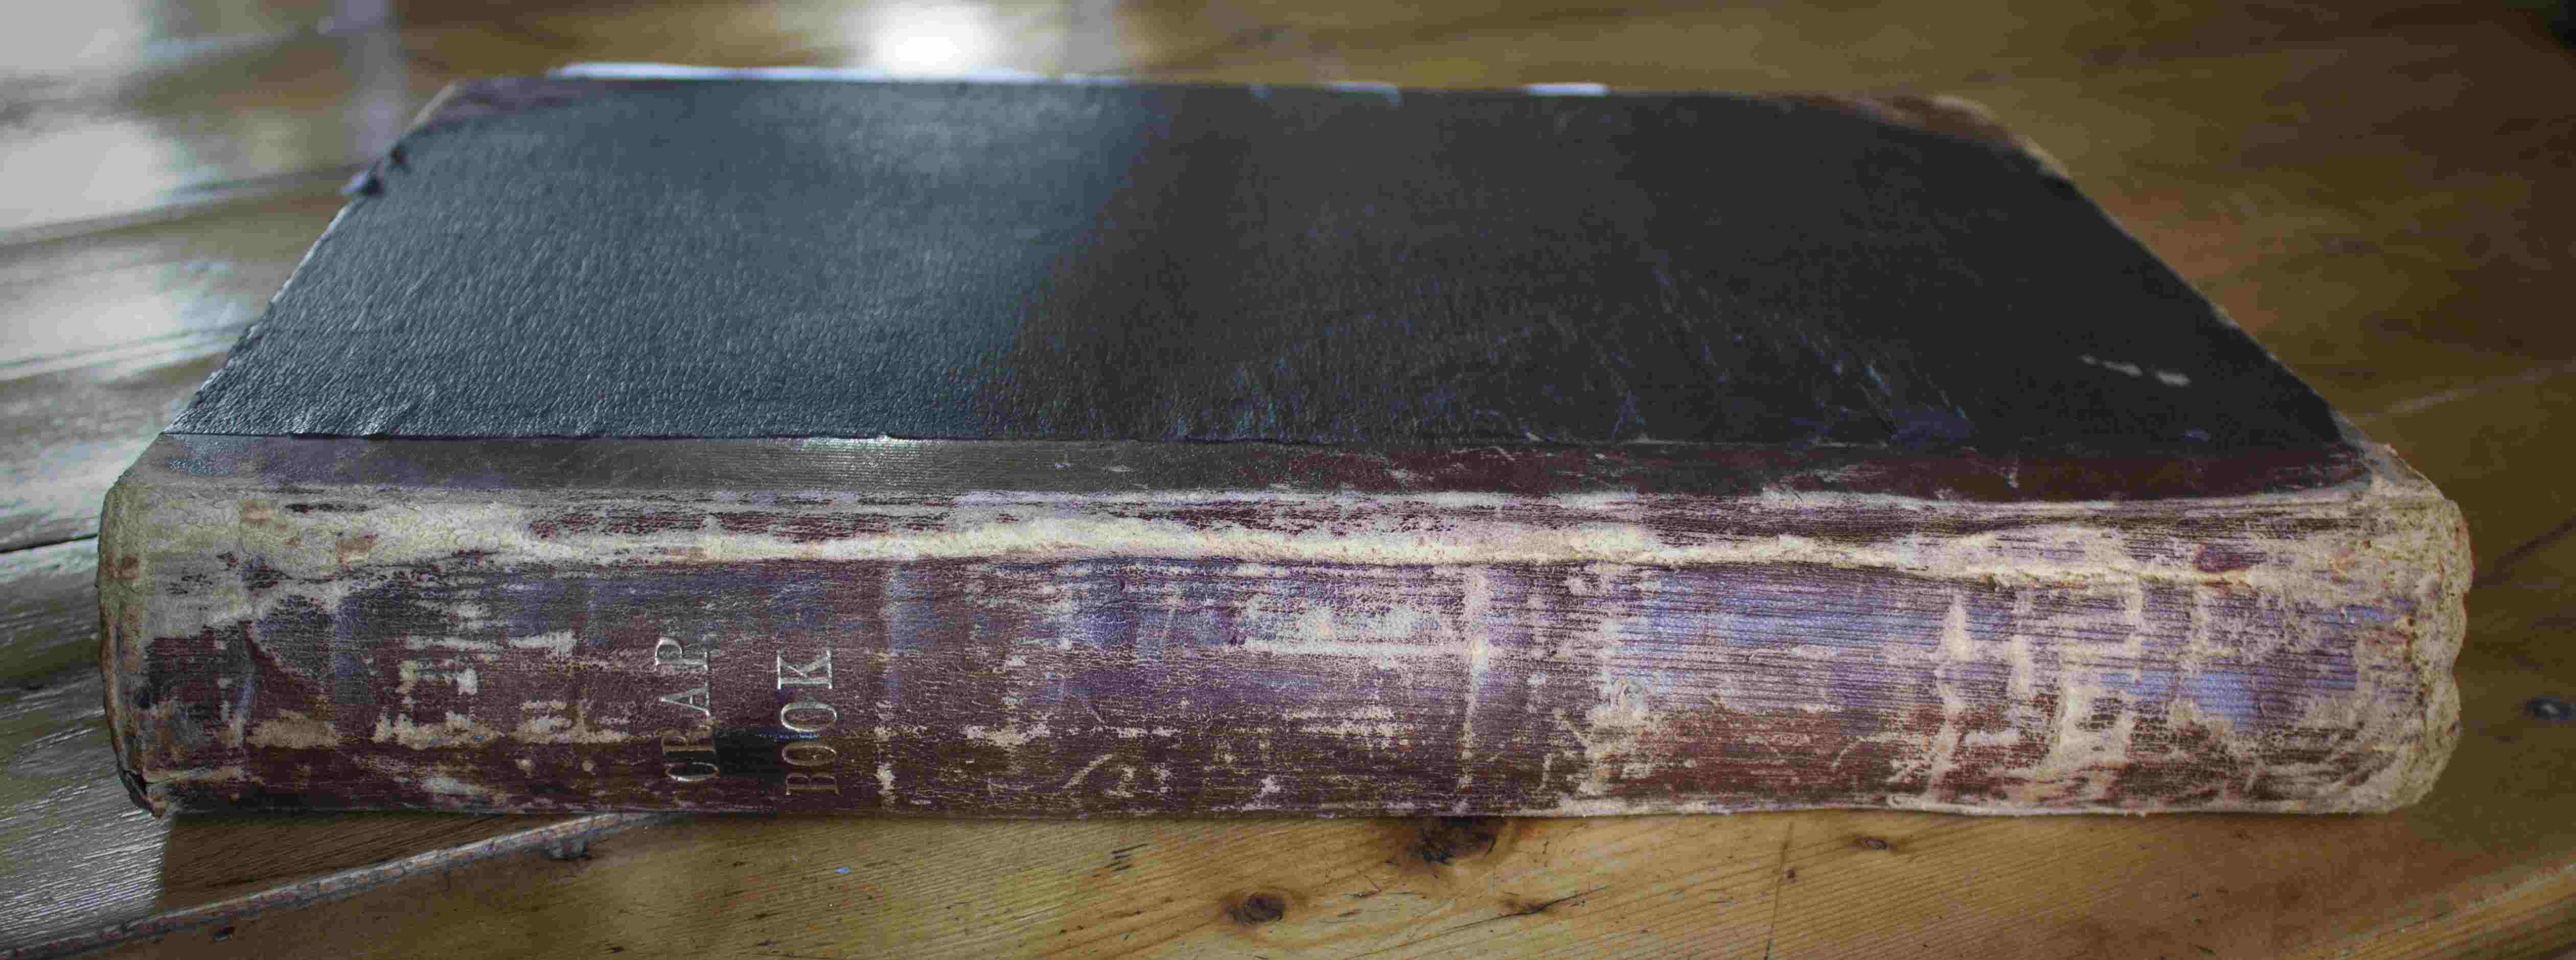 Photograph of an old book binding.